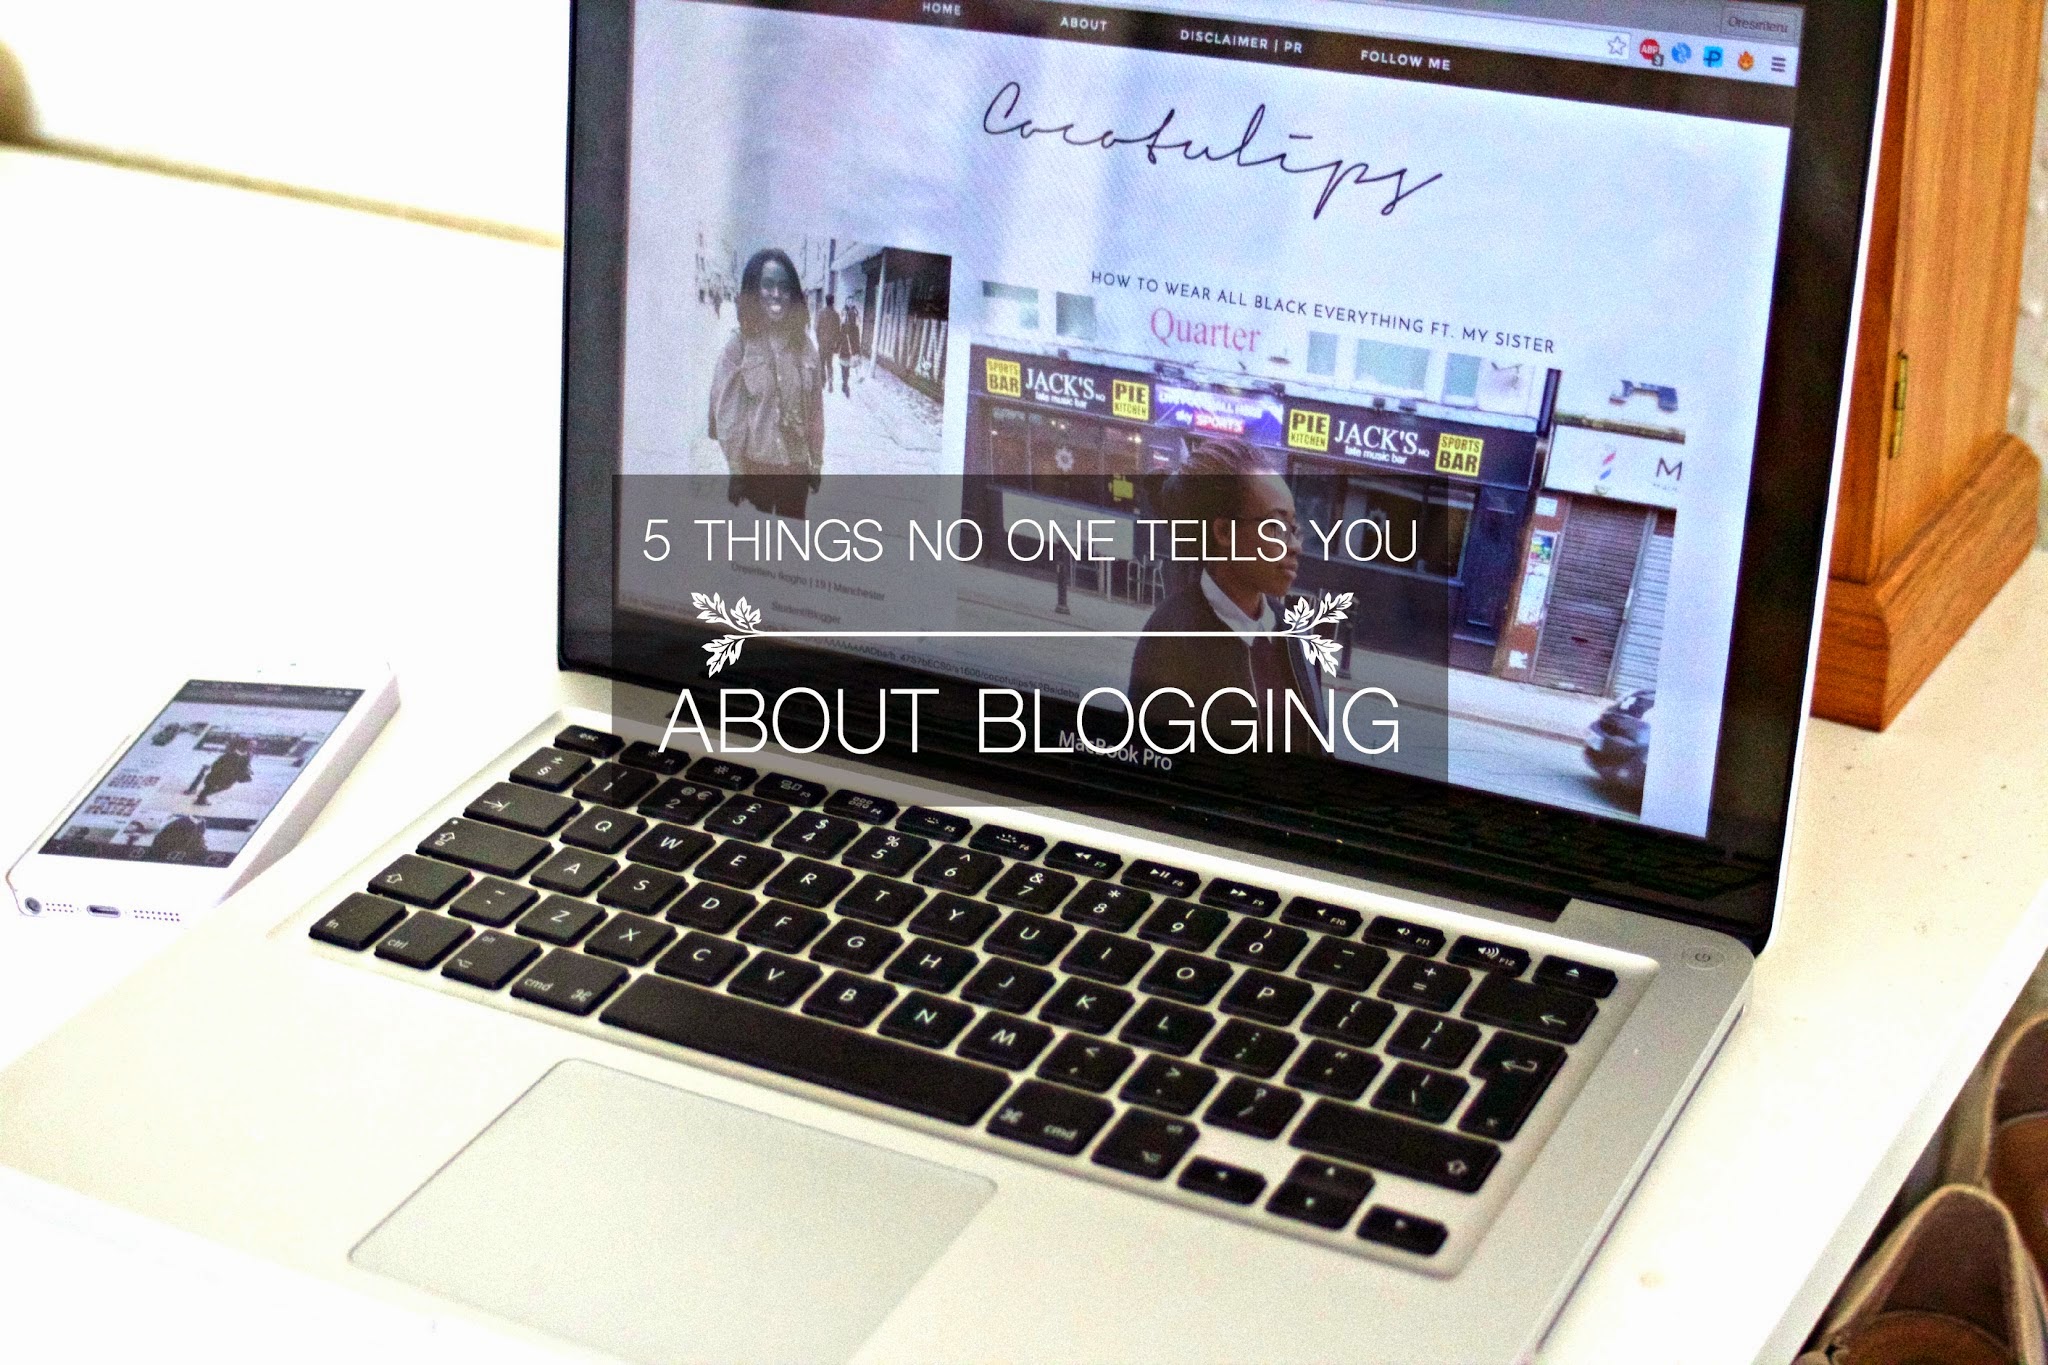 5 Things No One Tells You About Blogging